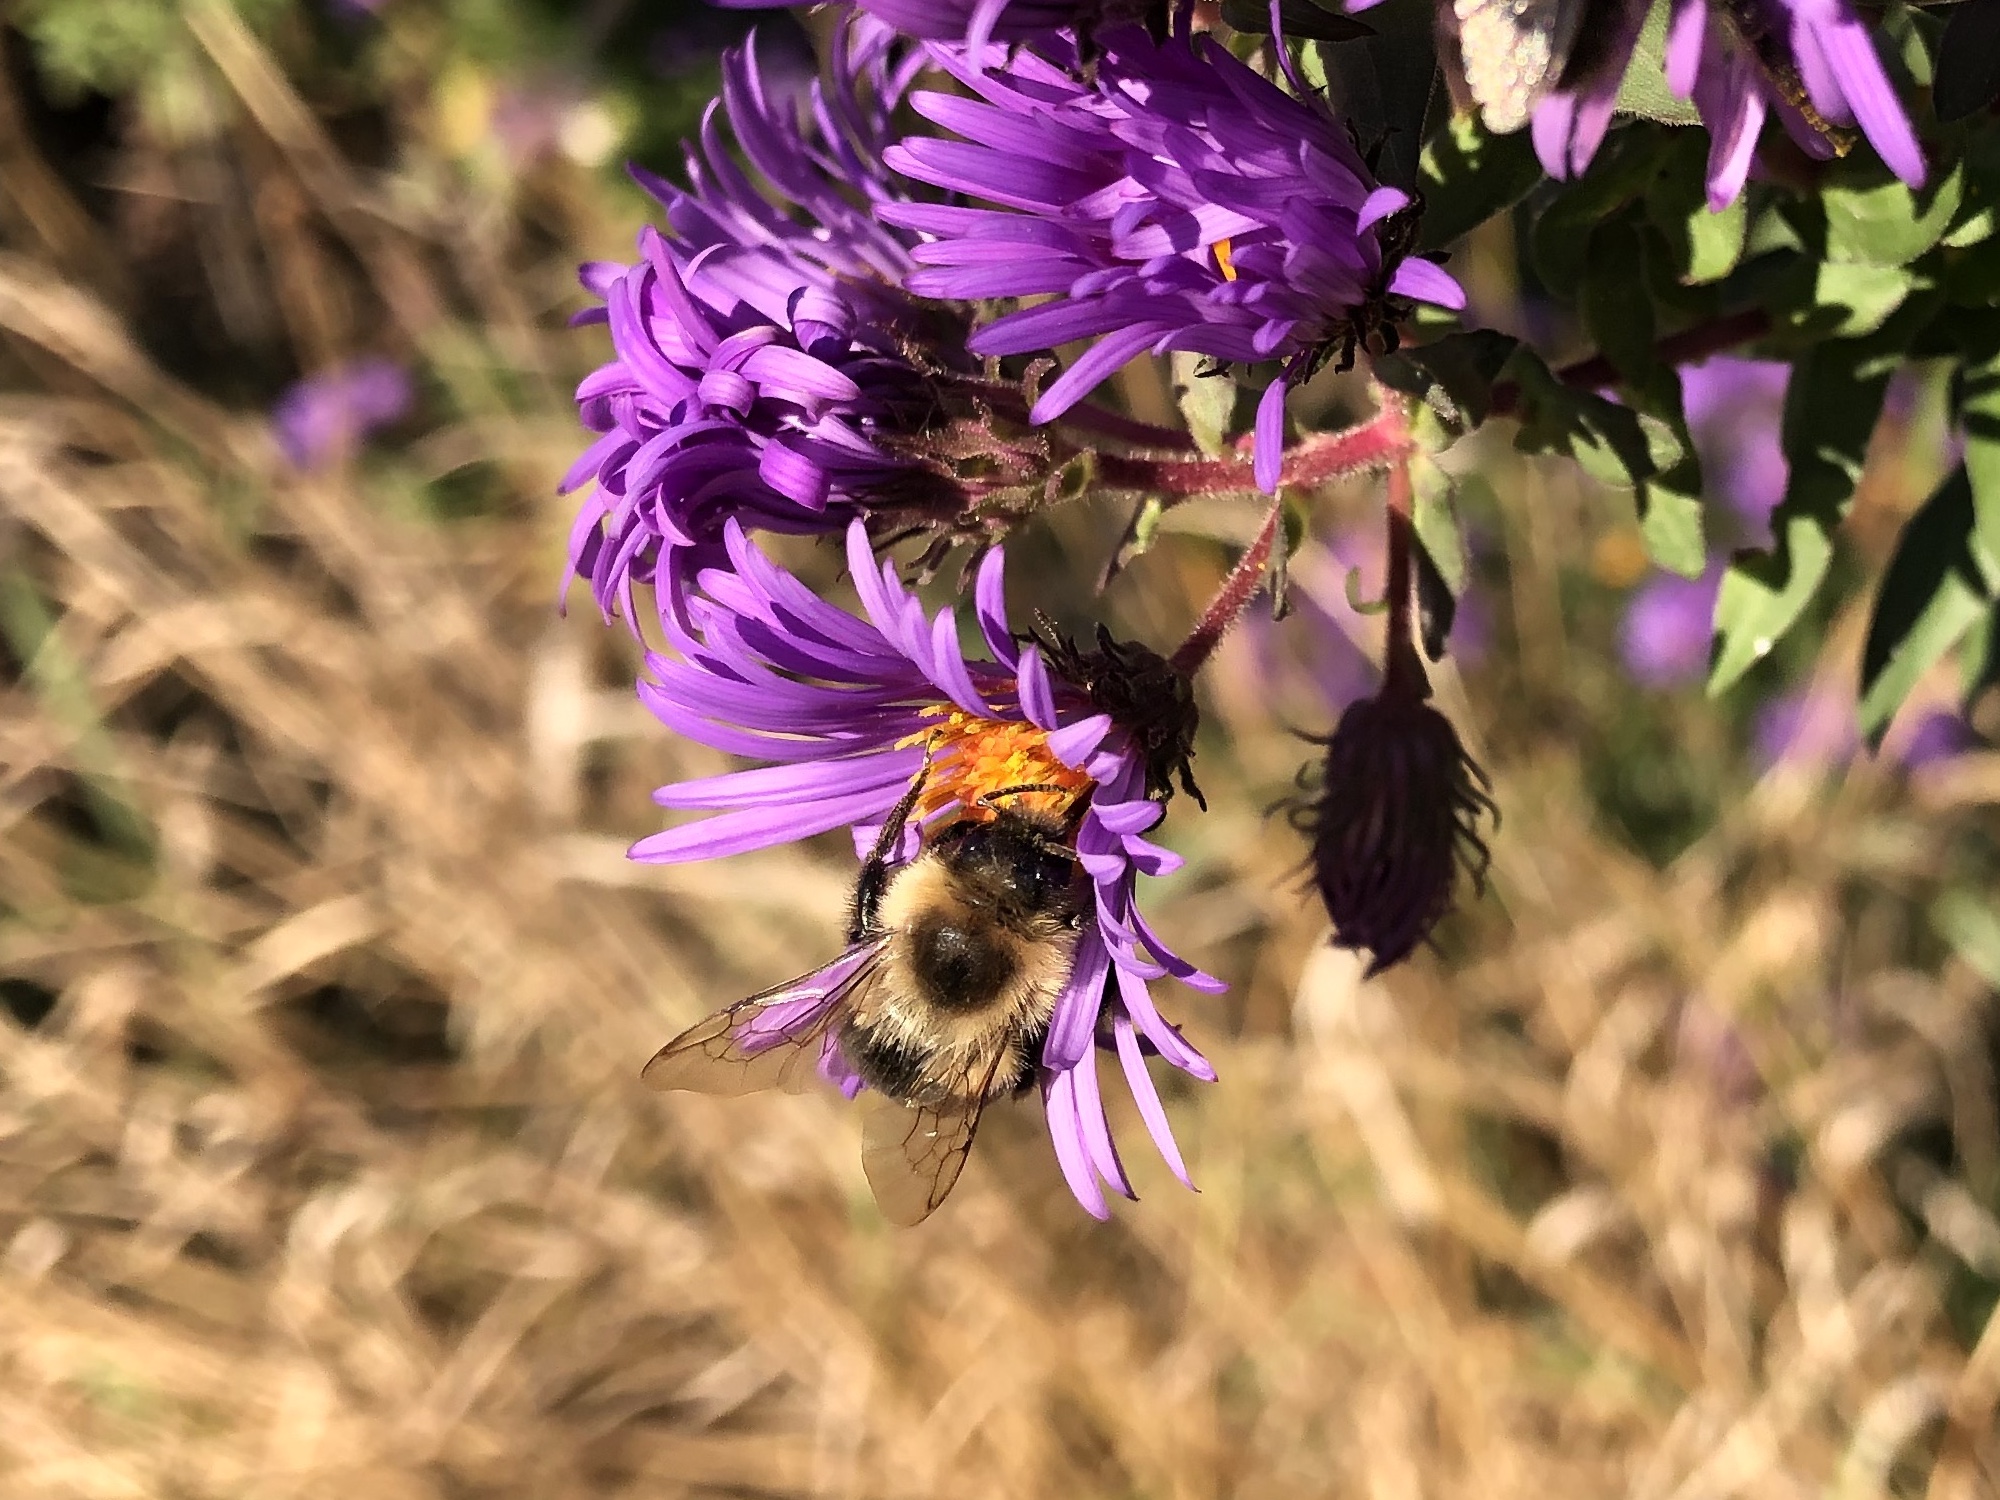 Bumblebee on aster on October 5, 2020.